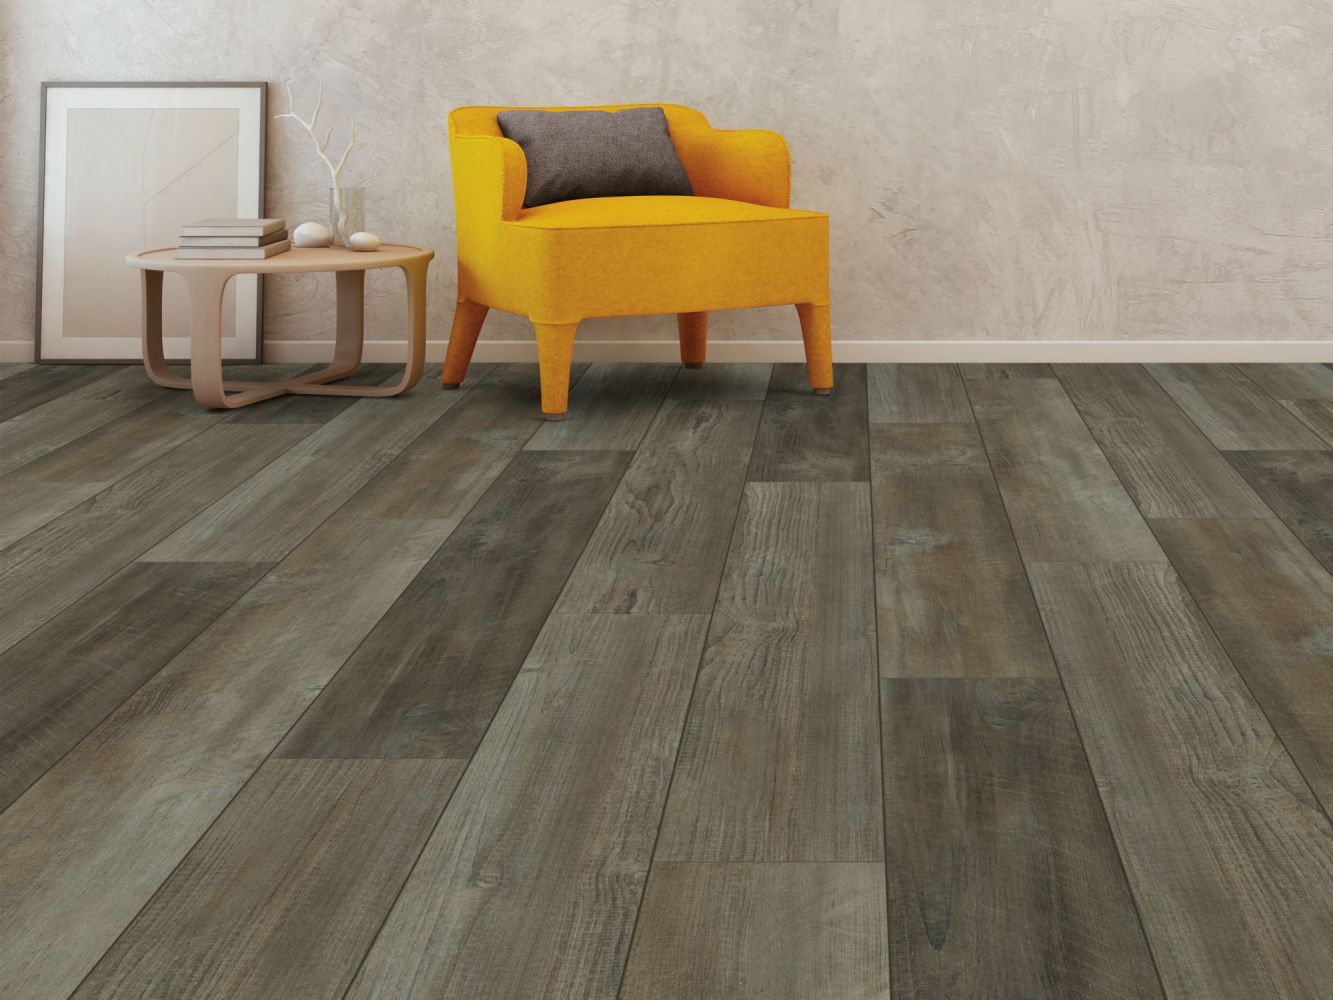 Shaw Floors Resilient Residential Bainfield Pine Click Antique Pine 05006_FR602